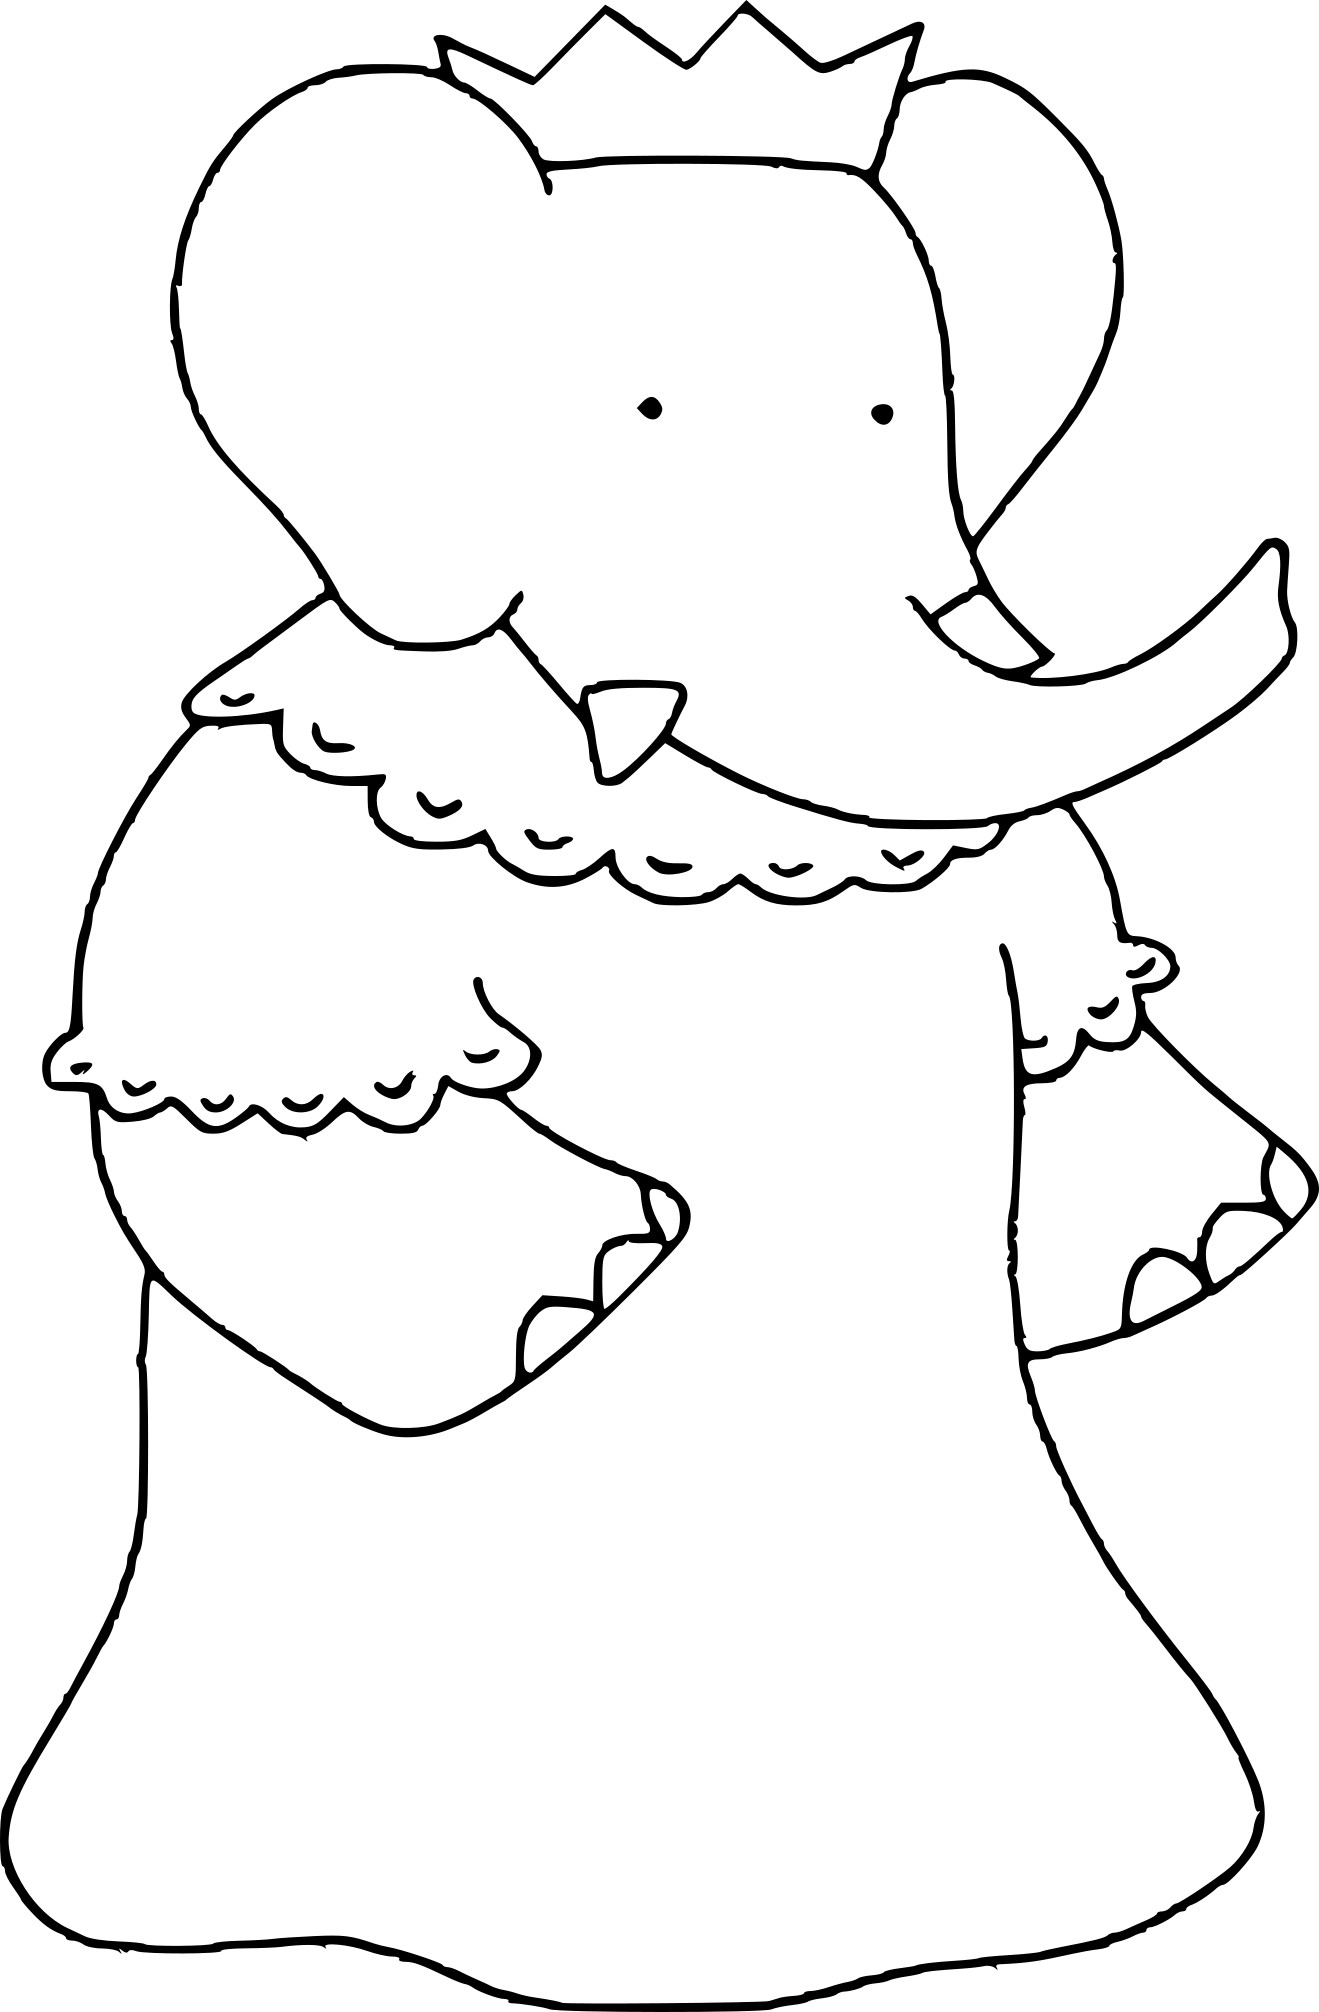 Babar Celeste coloring page